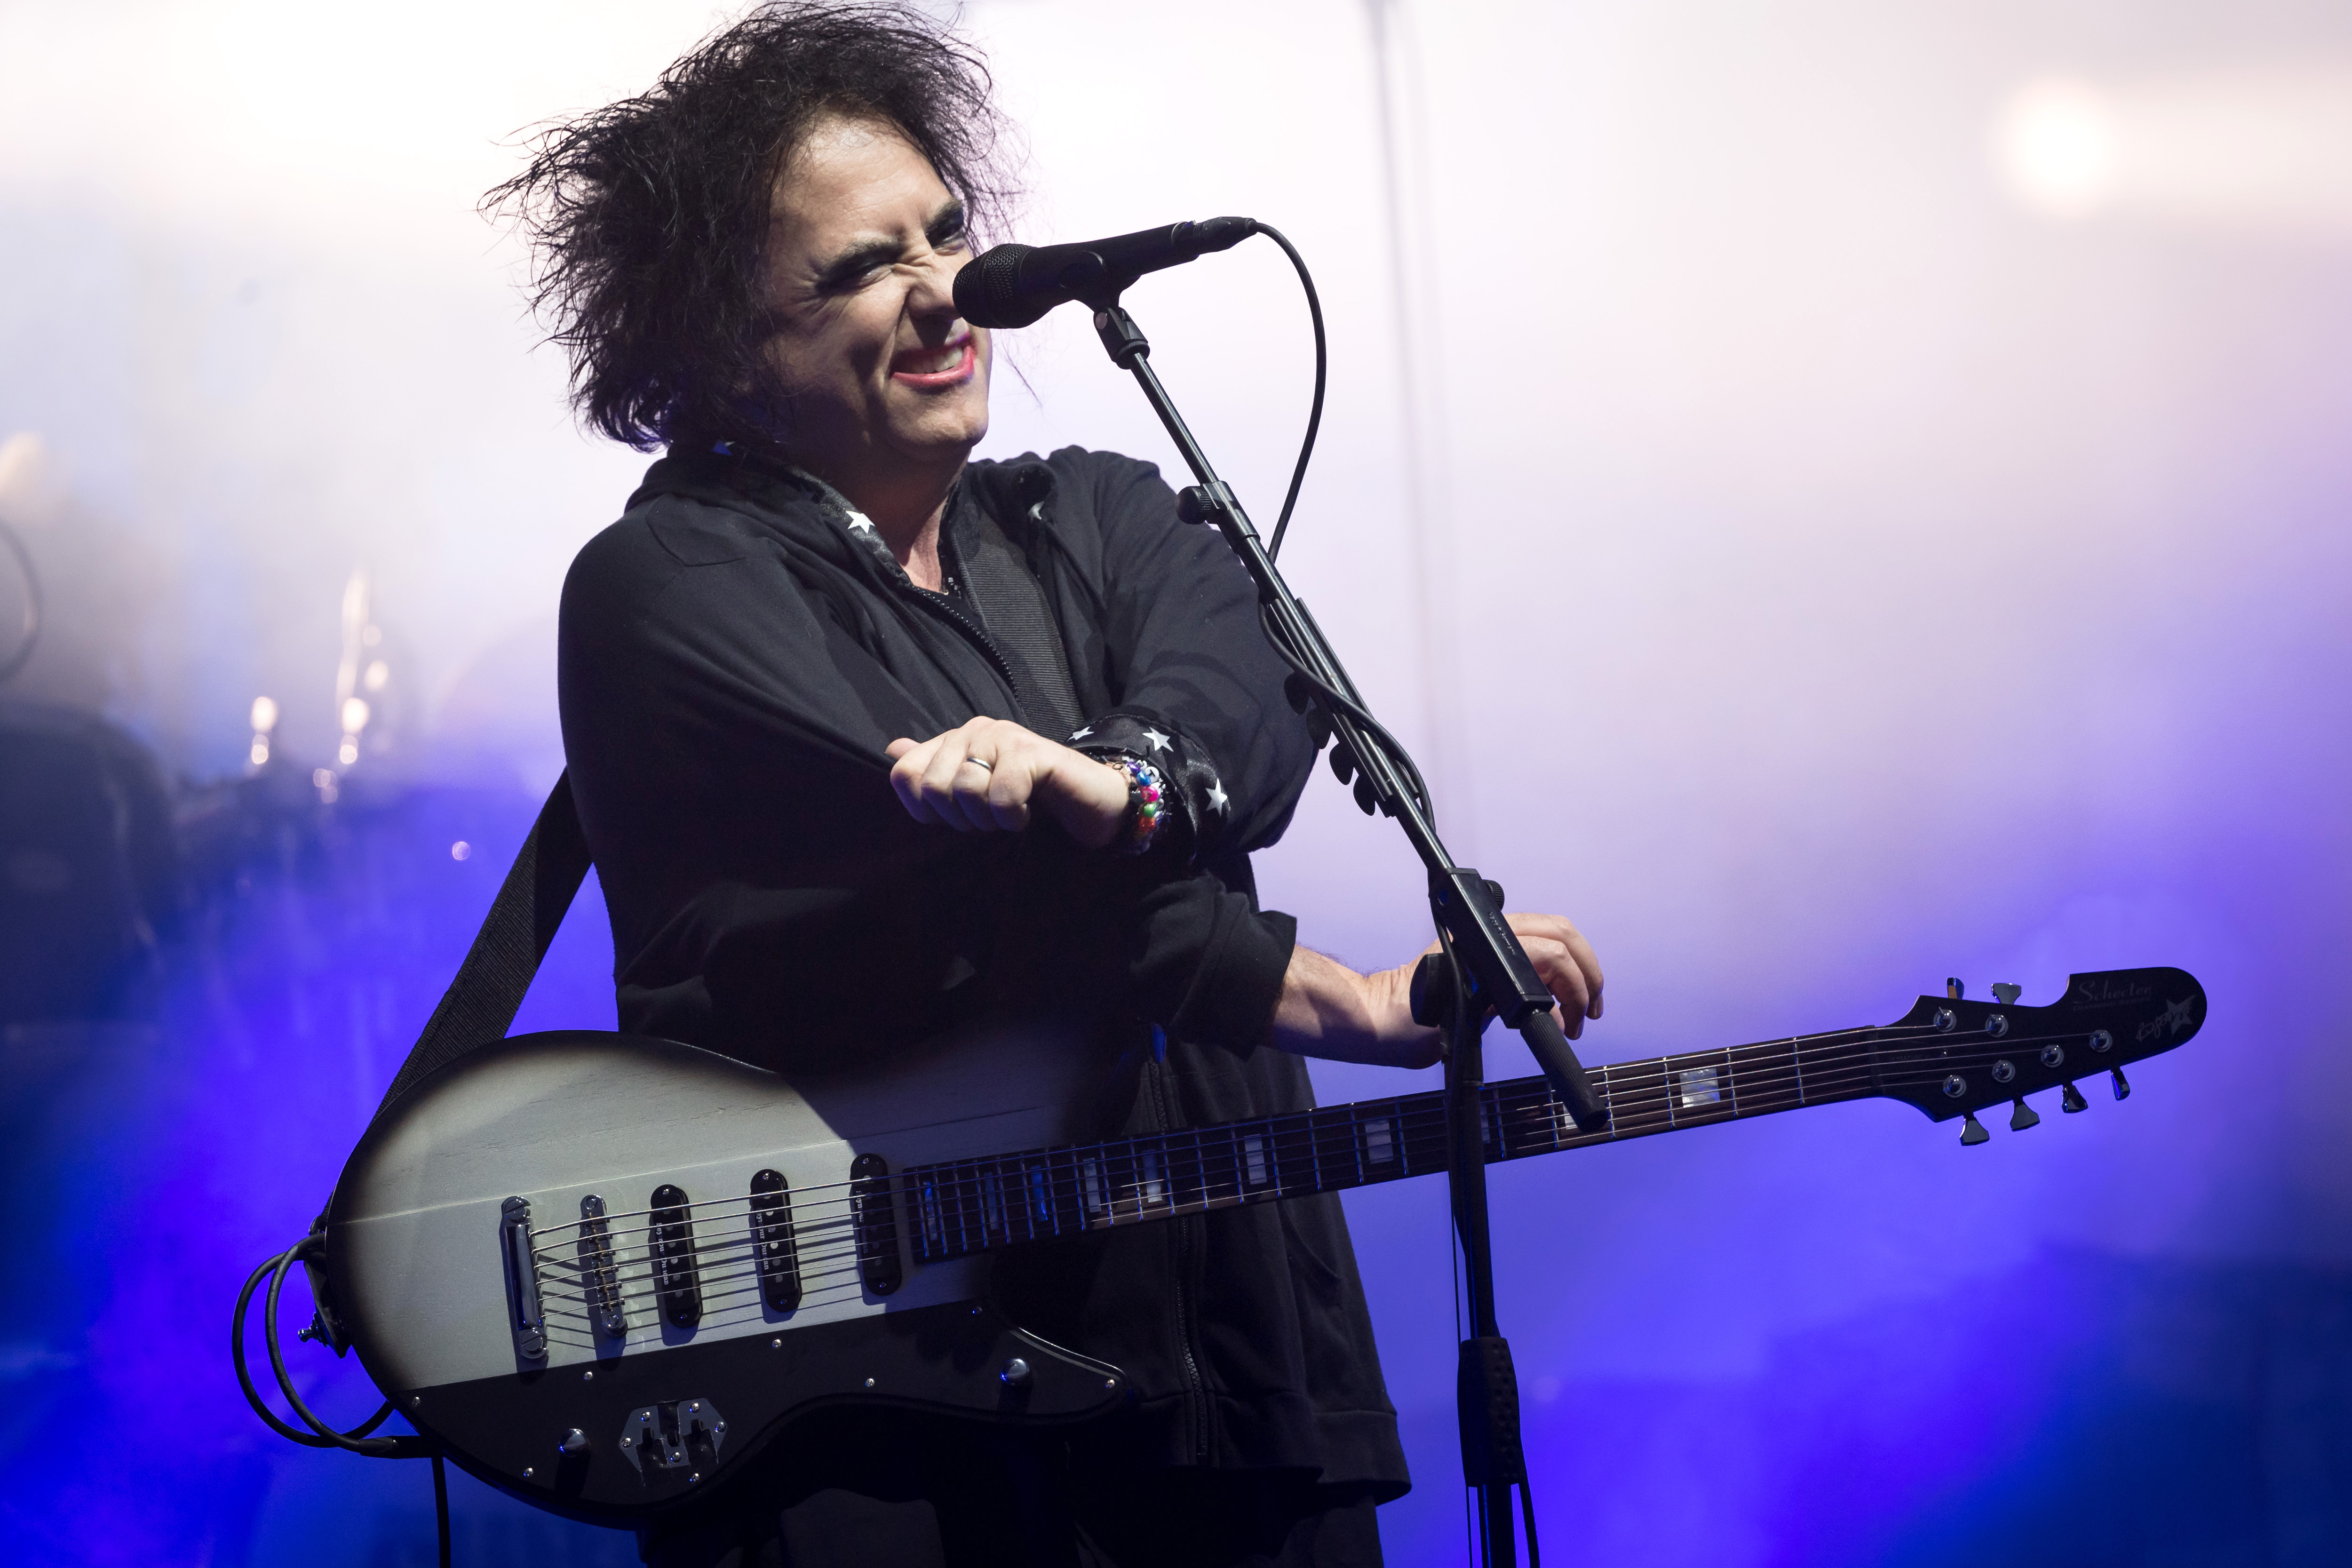 Robert Smith of The Cure performs on the Pyramid stage on day five of Glastonbury Festival at Worthy Farm, Pilton on June 30, 2019, in Glastonbury, England. | Source: Getty Images